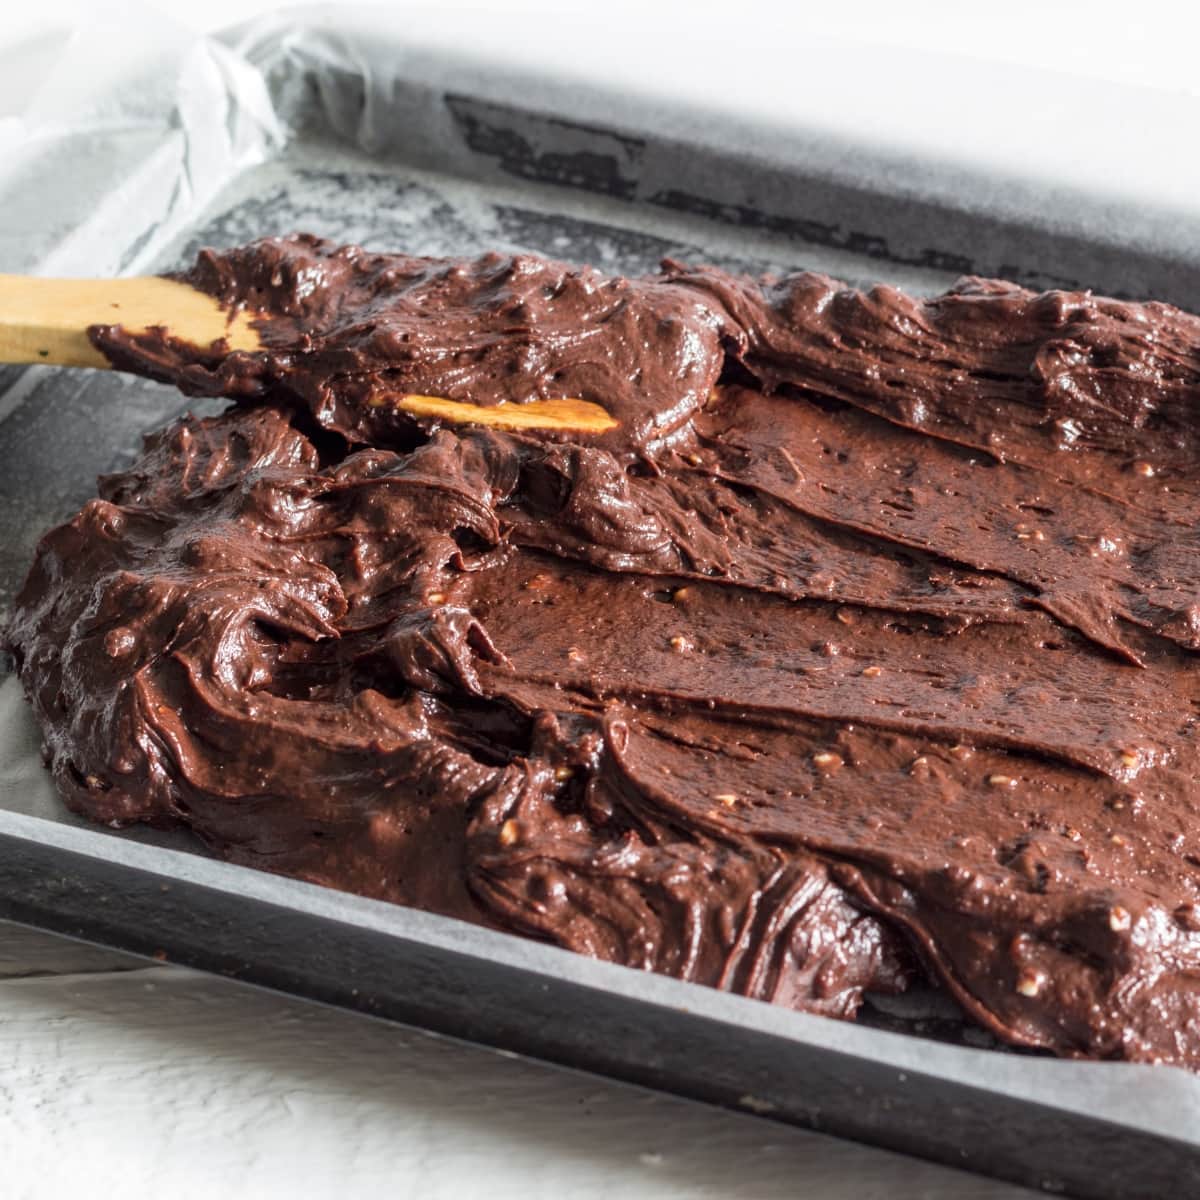 Chocolate Brownies Mix in a Pan Ready for Baking